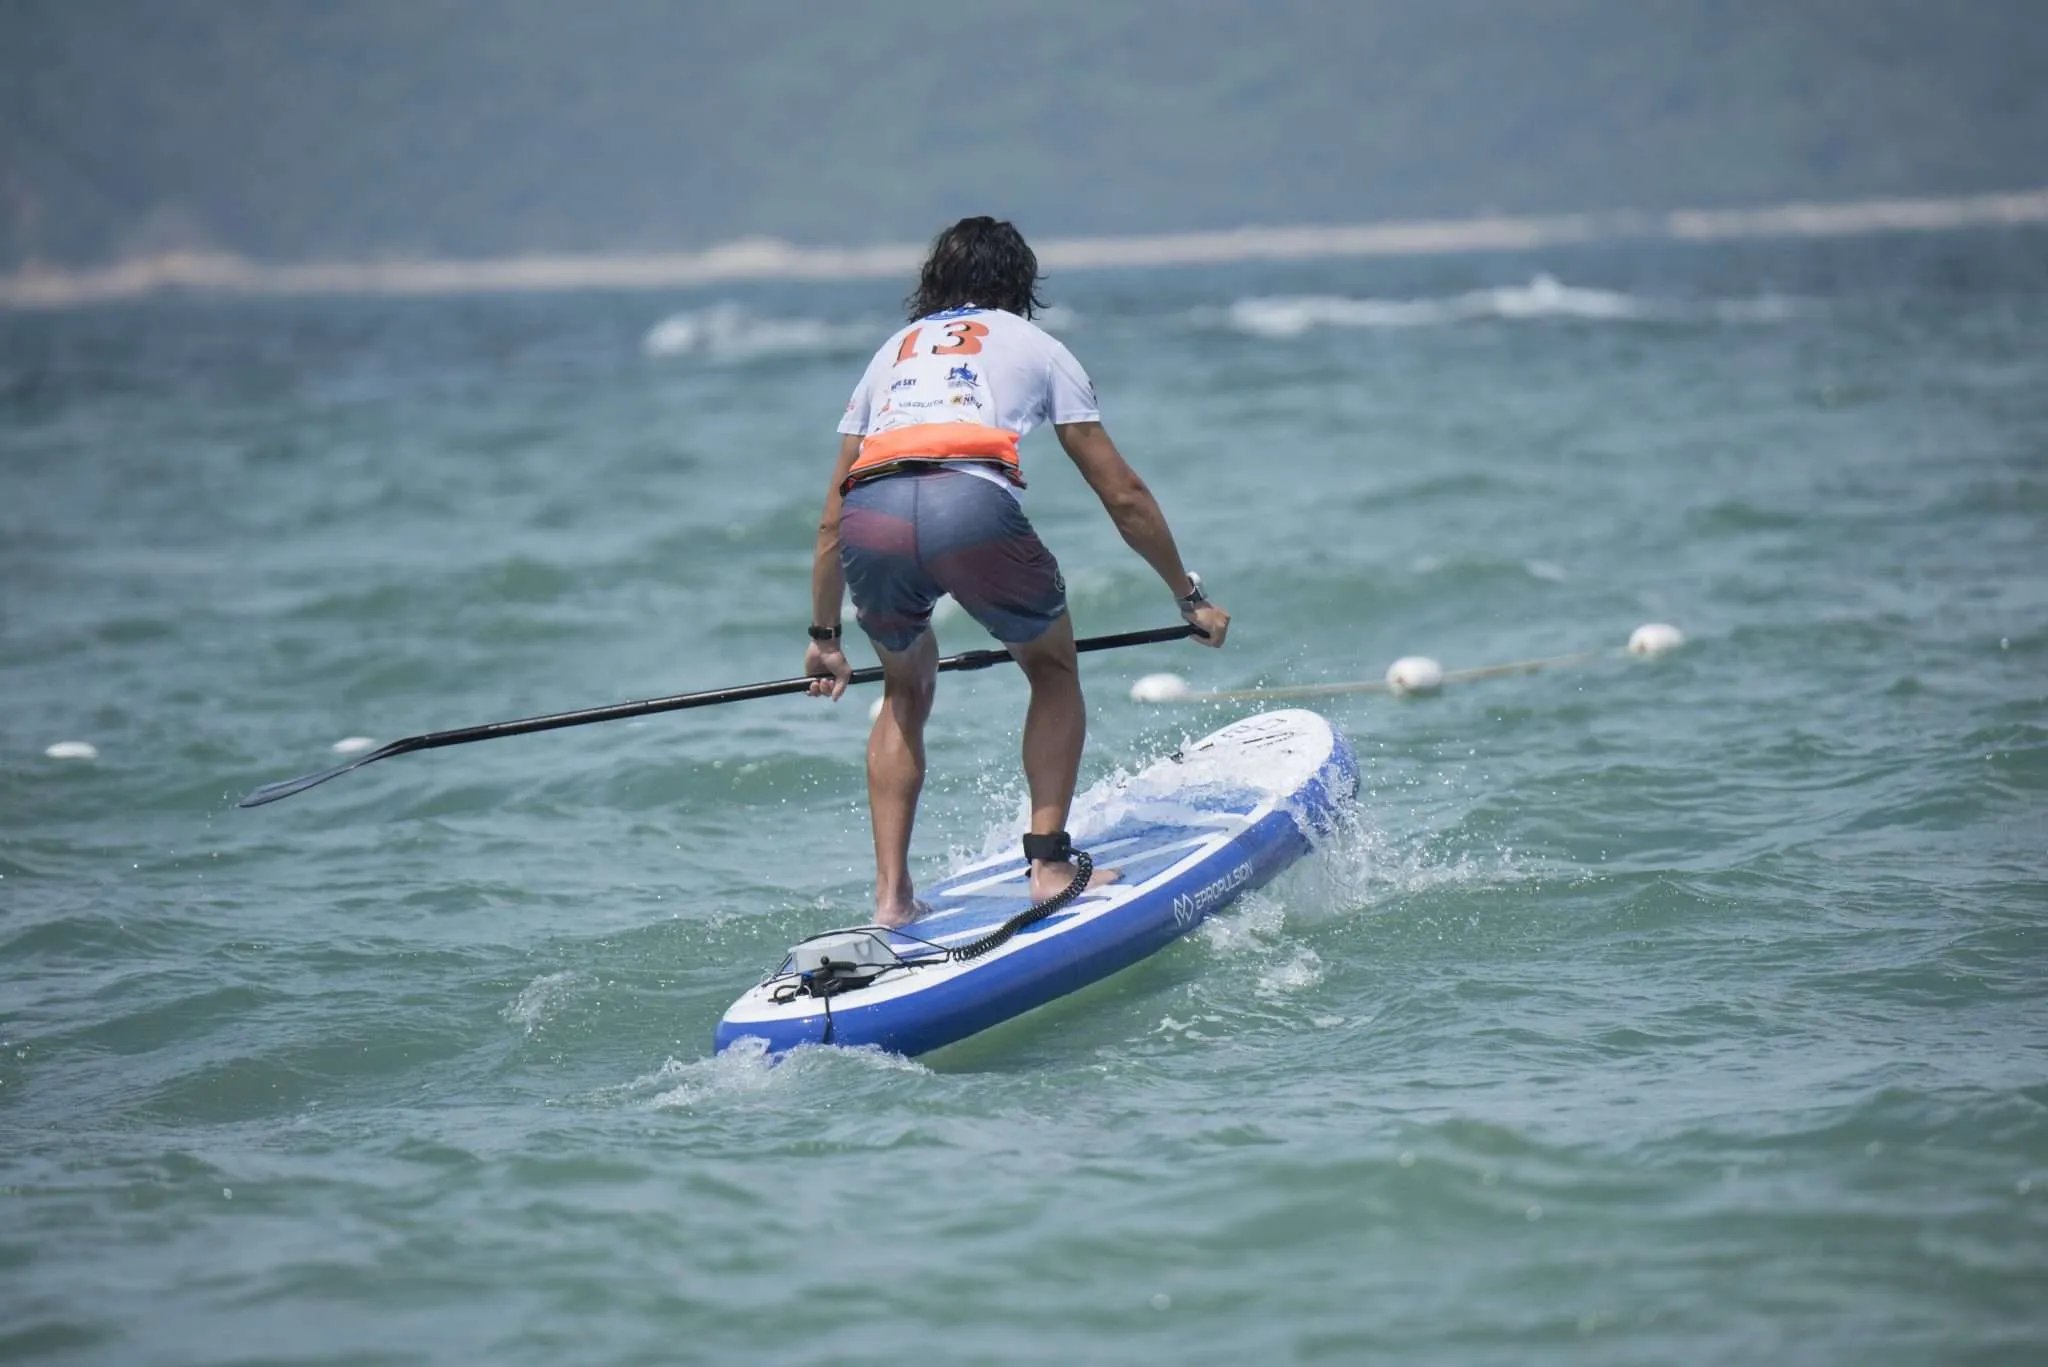 Travel time from ePropulsion Vaquita SUP motor incl. 324 Wh battery